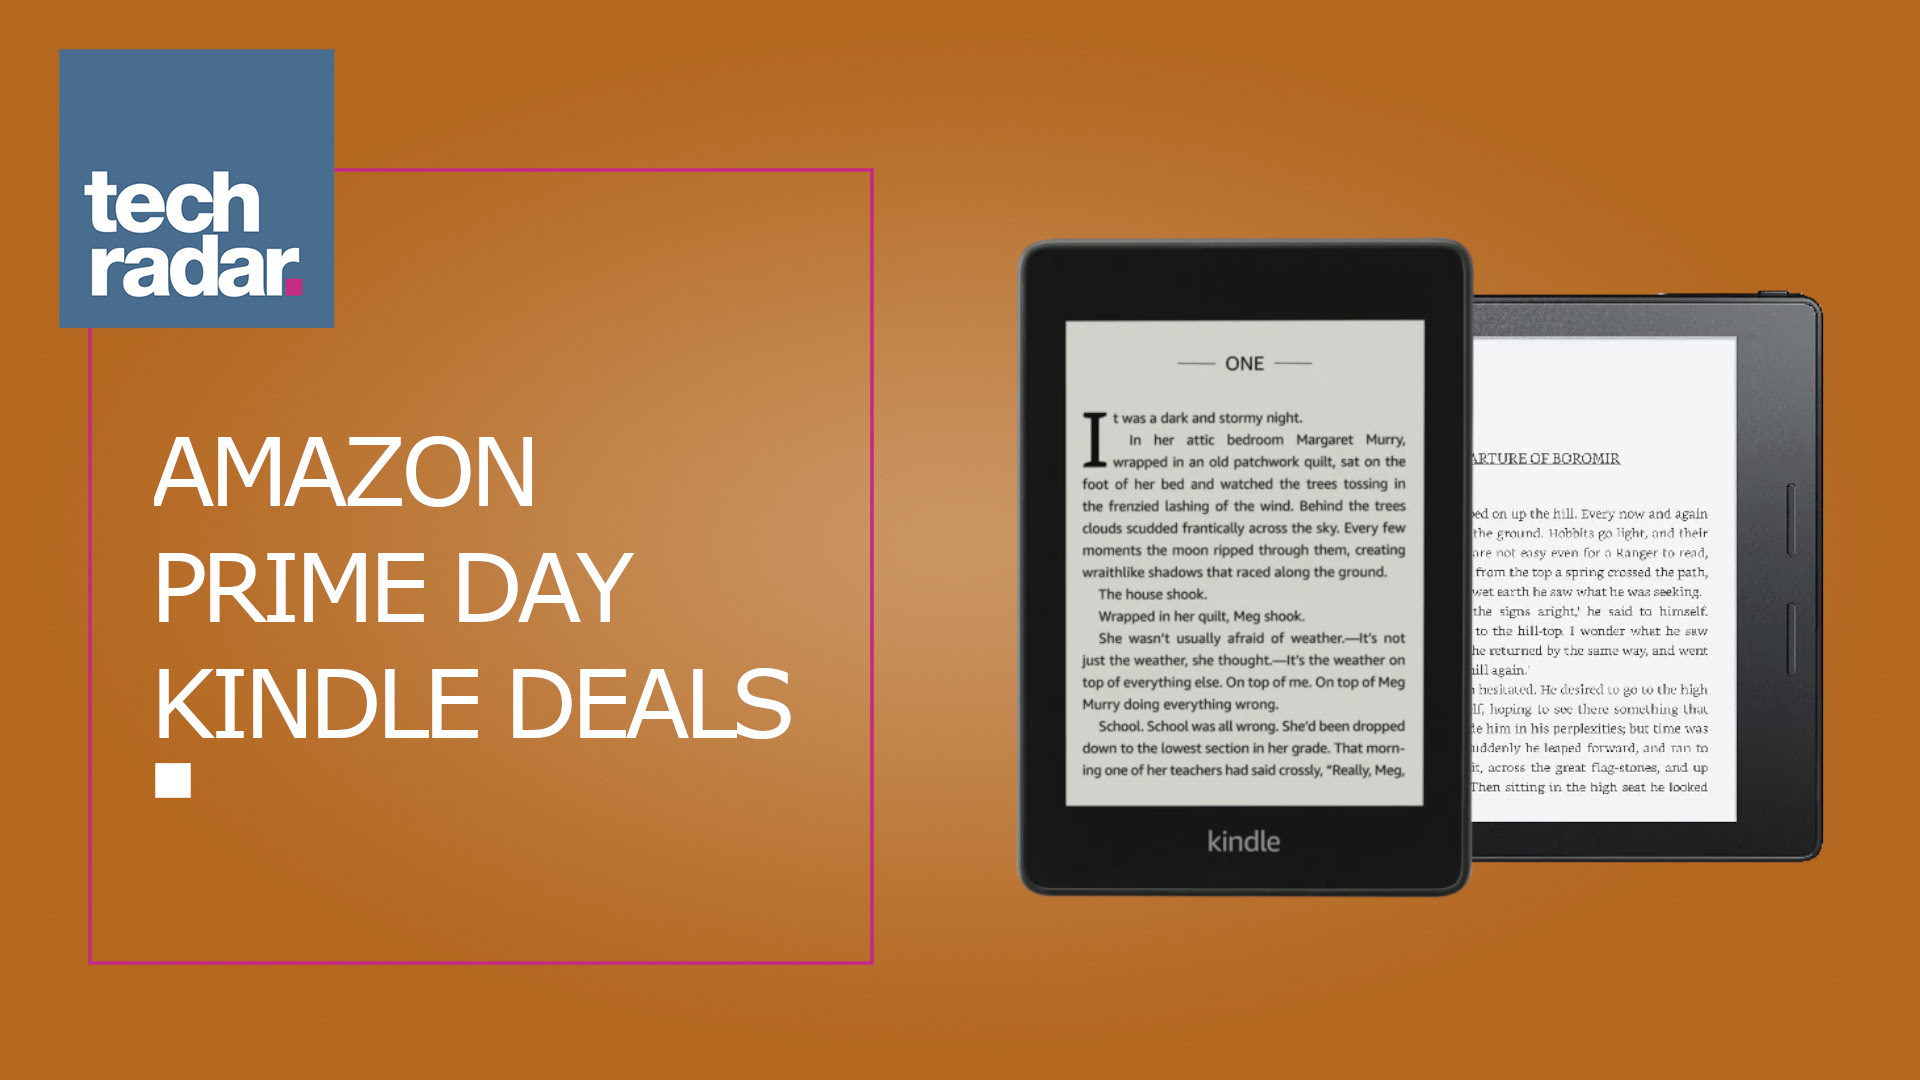 Amazon Prime Day Kindle deals 2022: what to expect this year